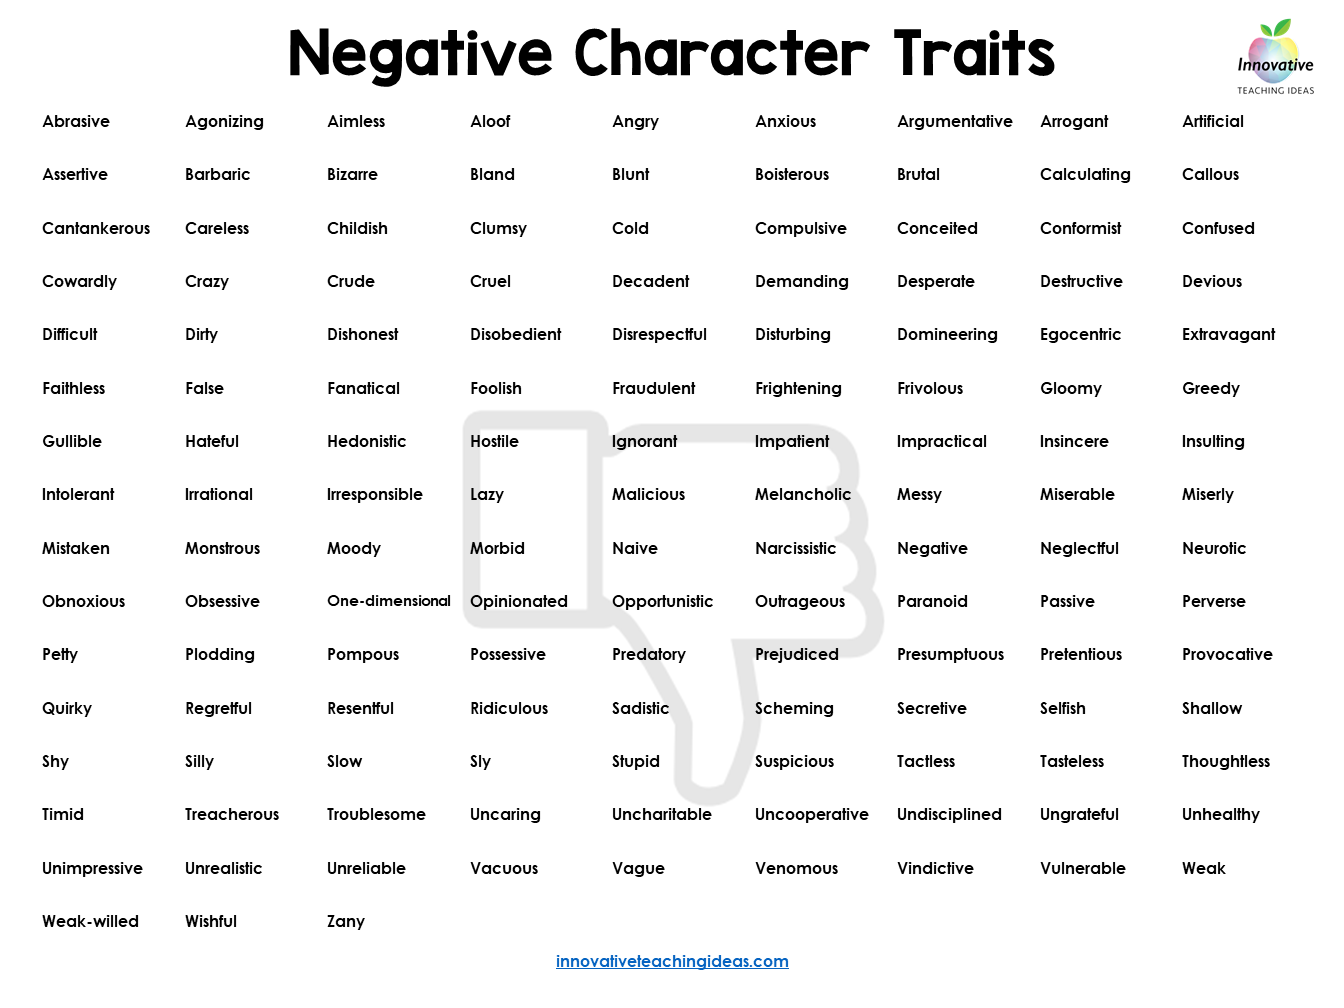 Character Traits List For Teachers And Students Innovative Teaching Ideas Teaching Resources